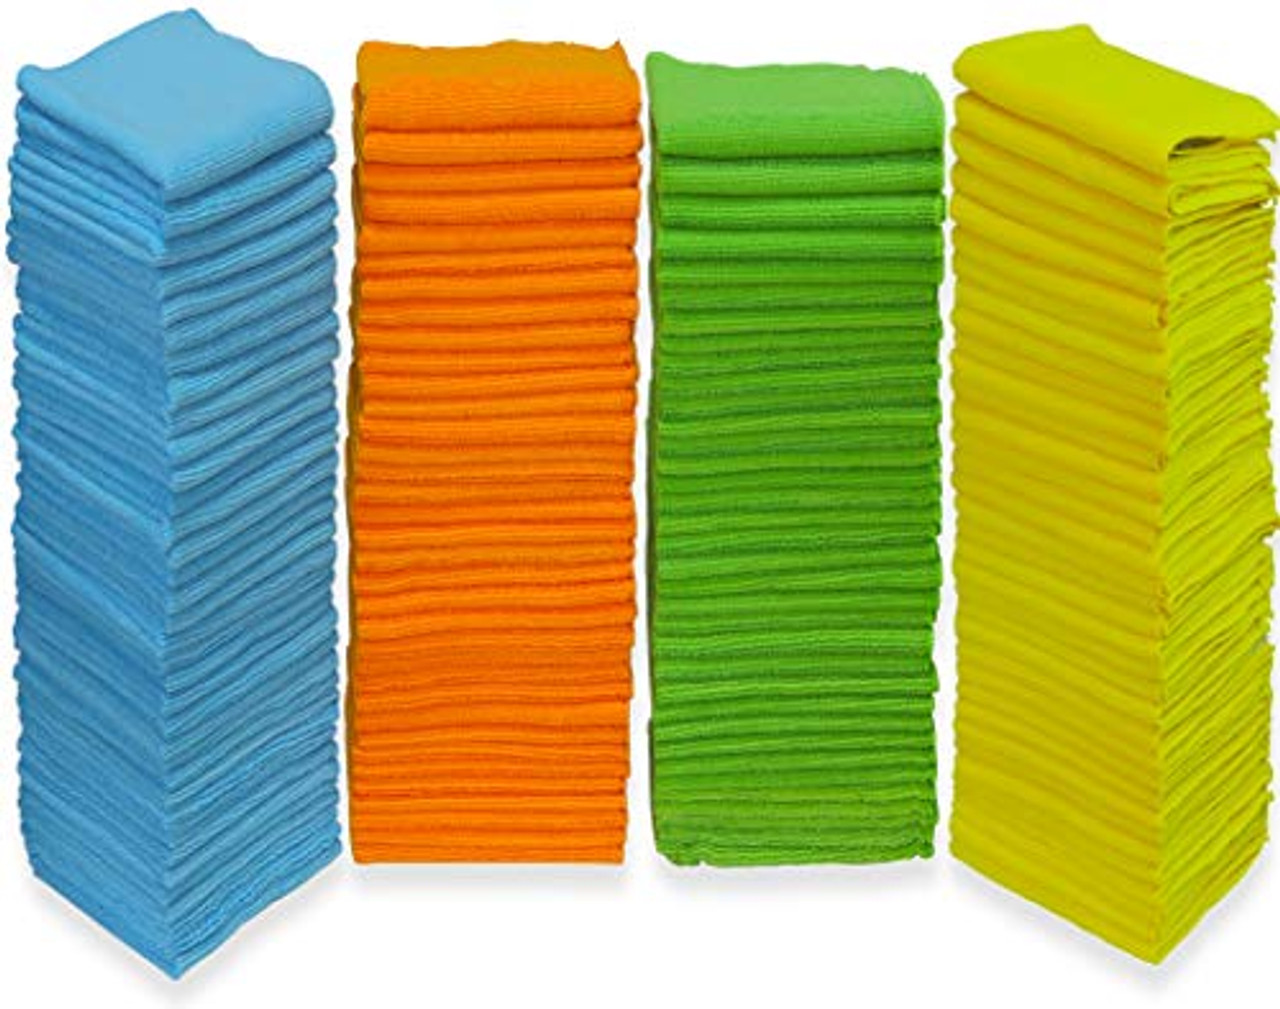 S&T INC. 923801 Microfiber Cleaning Cloths, Reusable and Lint-Free Towels  for Home, Kitchen and Auto, 100 Pack, Assorted